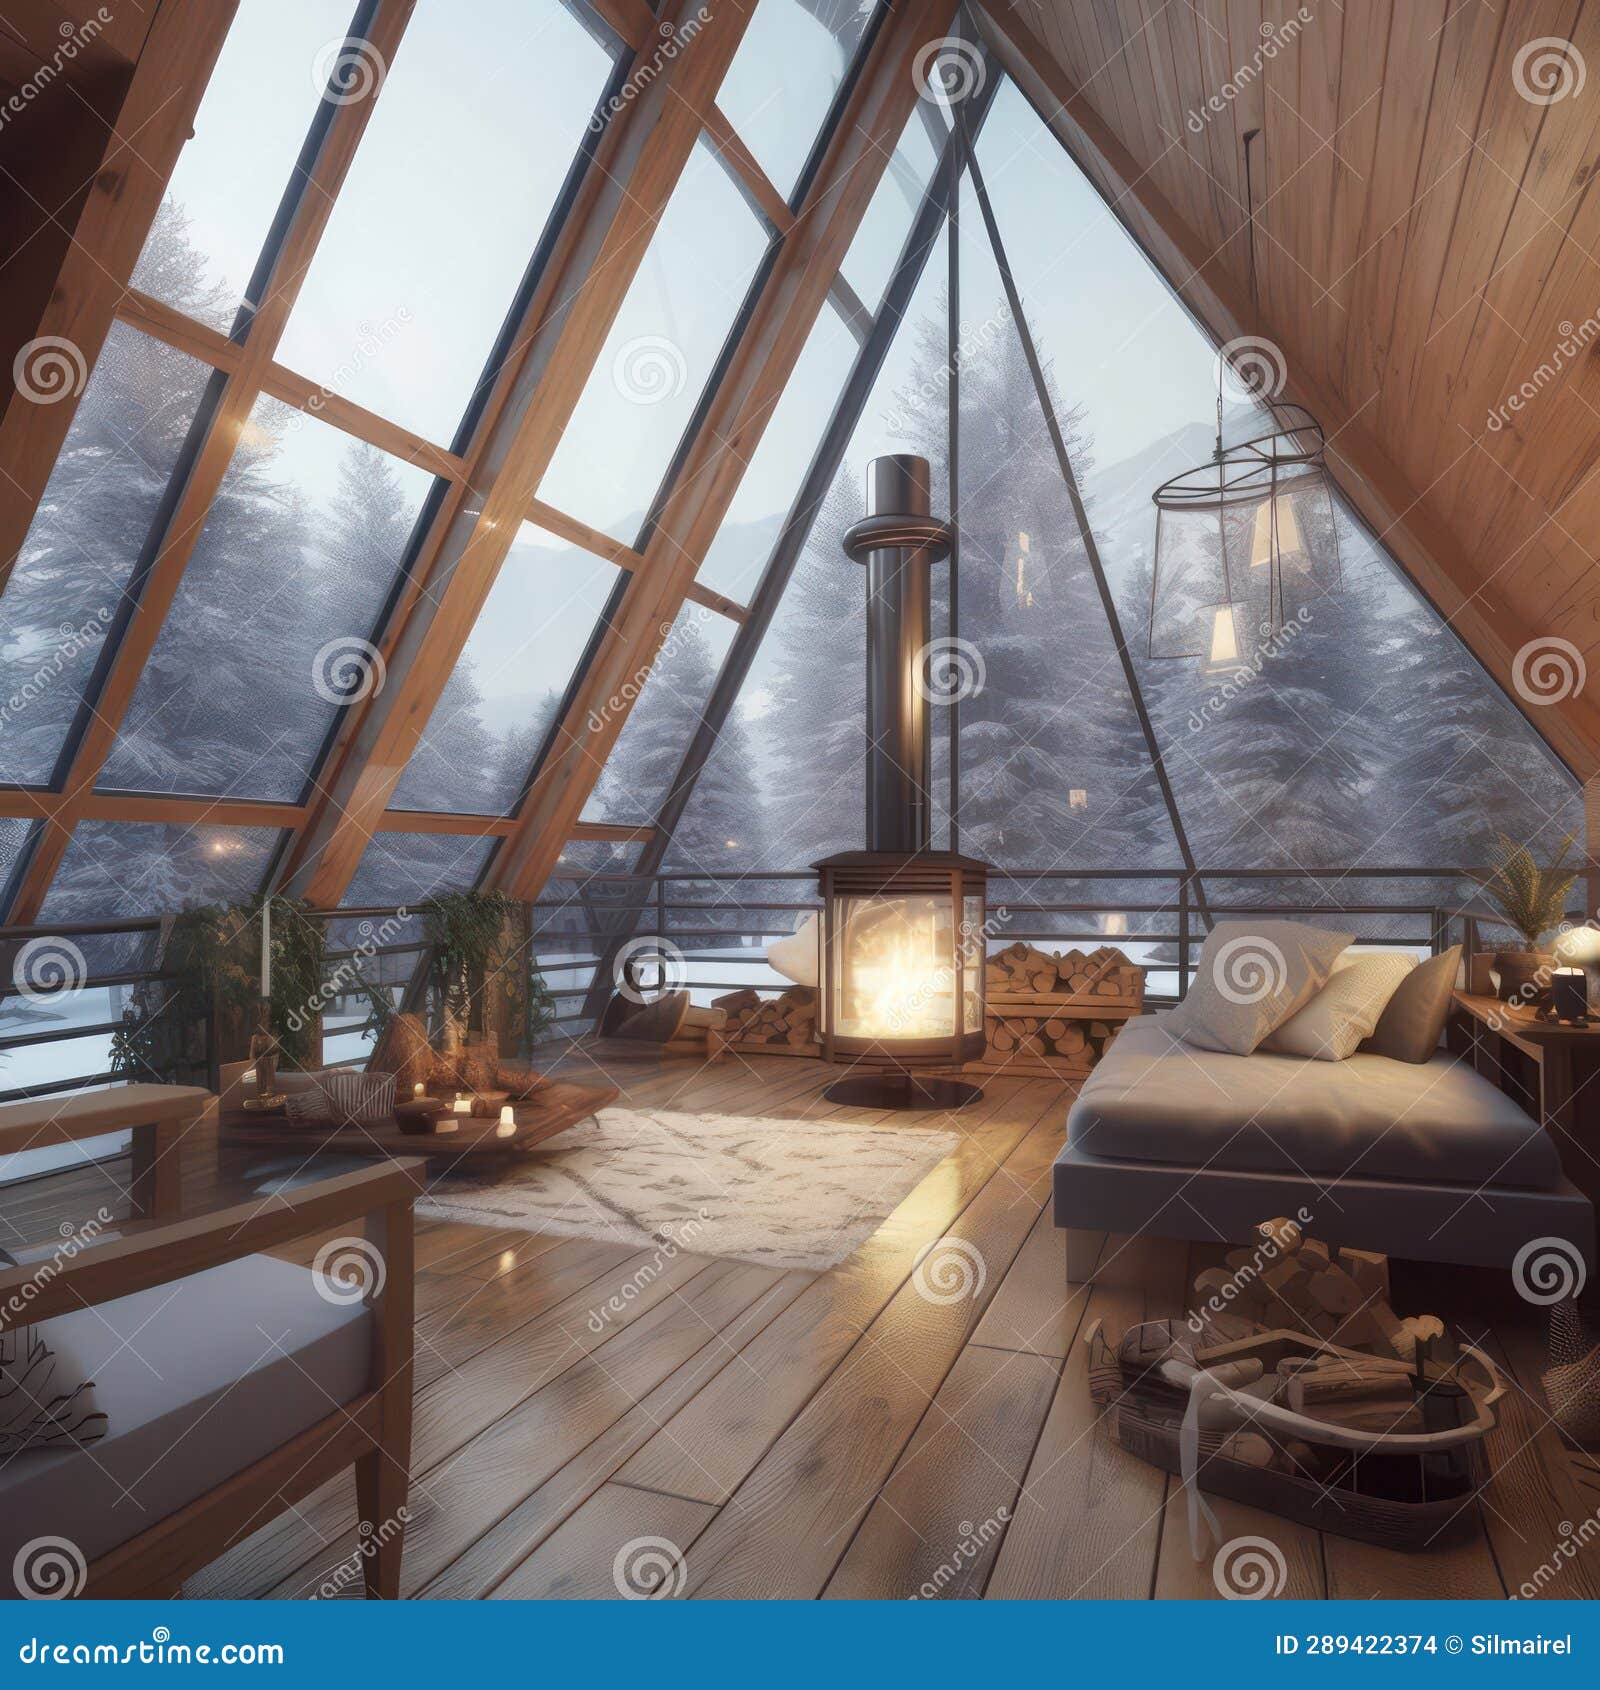 photo of the beautiful, stylish, lightful and cosy indoor interior of triangular house glamping resort in winter snow forest